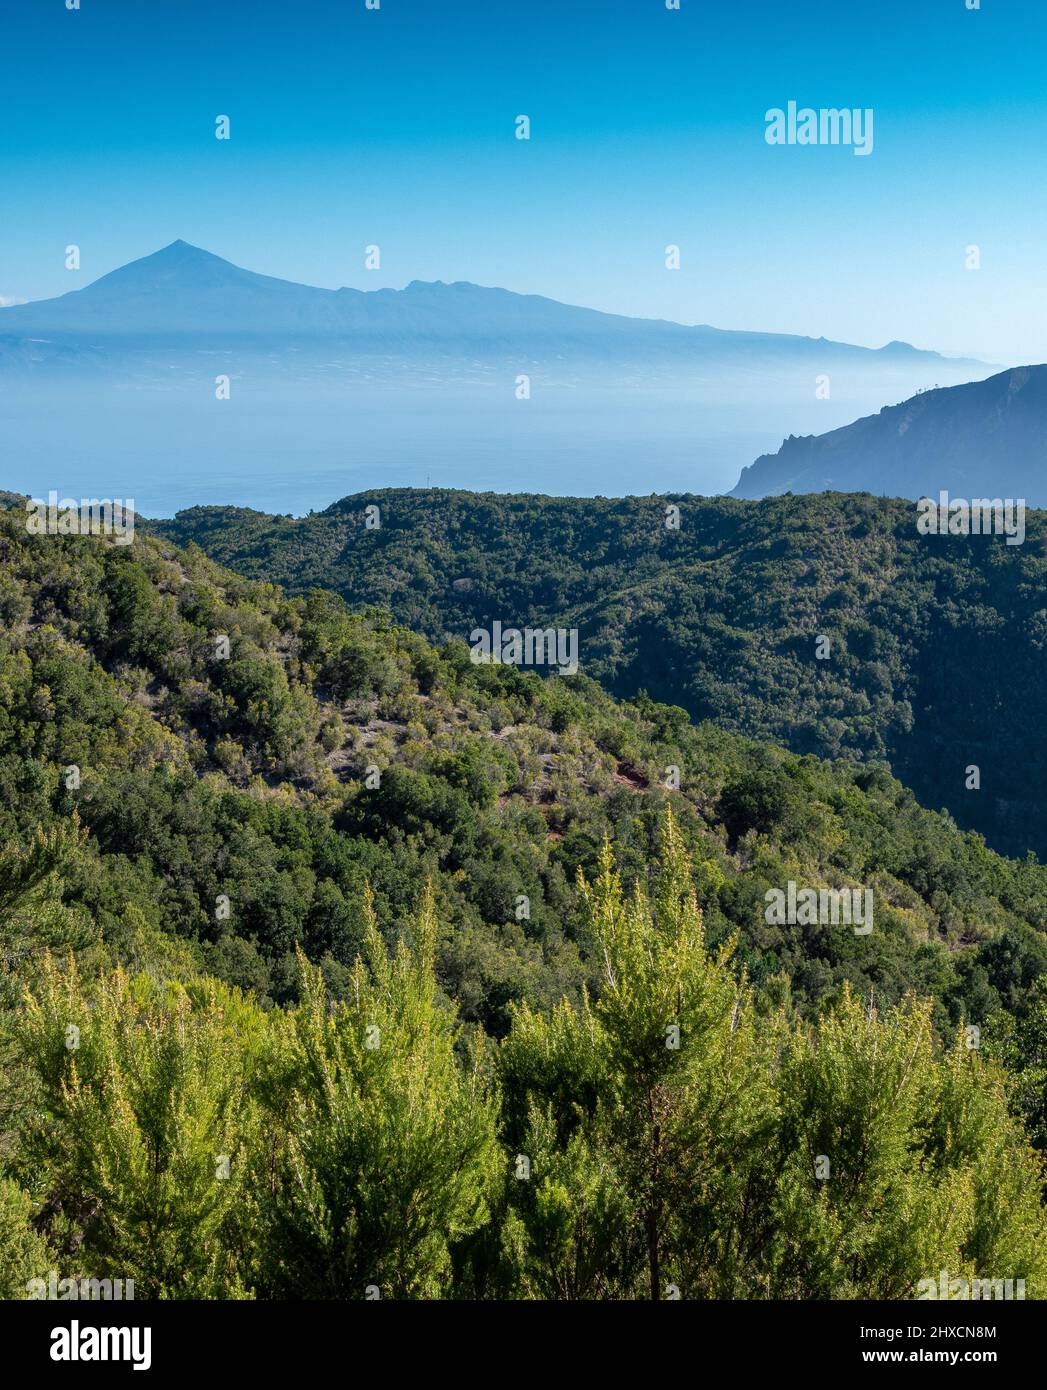 The ancient dense forests on the island of La Gomera  with Mount Teide volcano on Tenerife in the distance in the Canary Islands, Spain Stock Photo